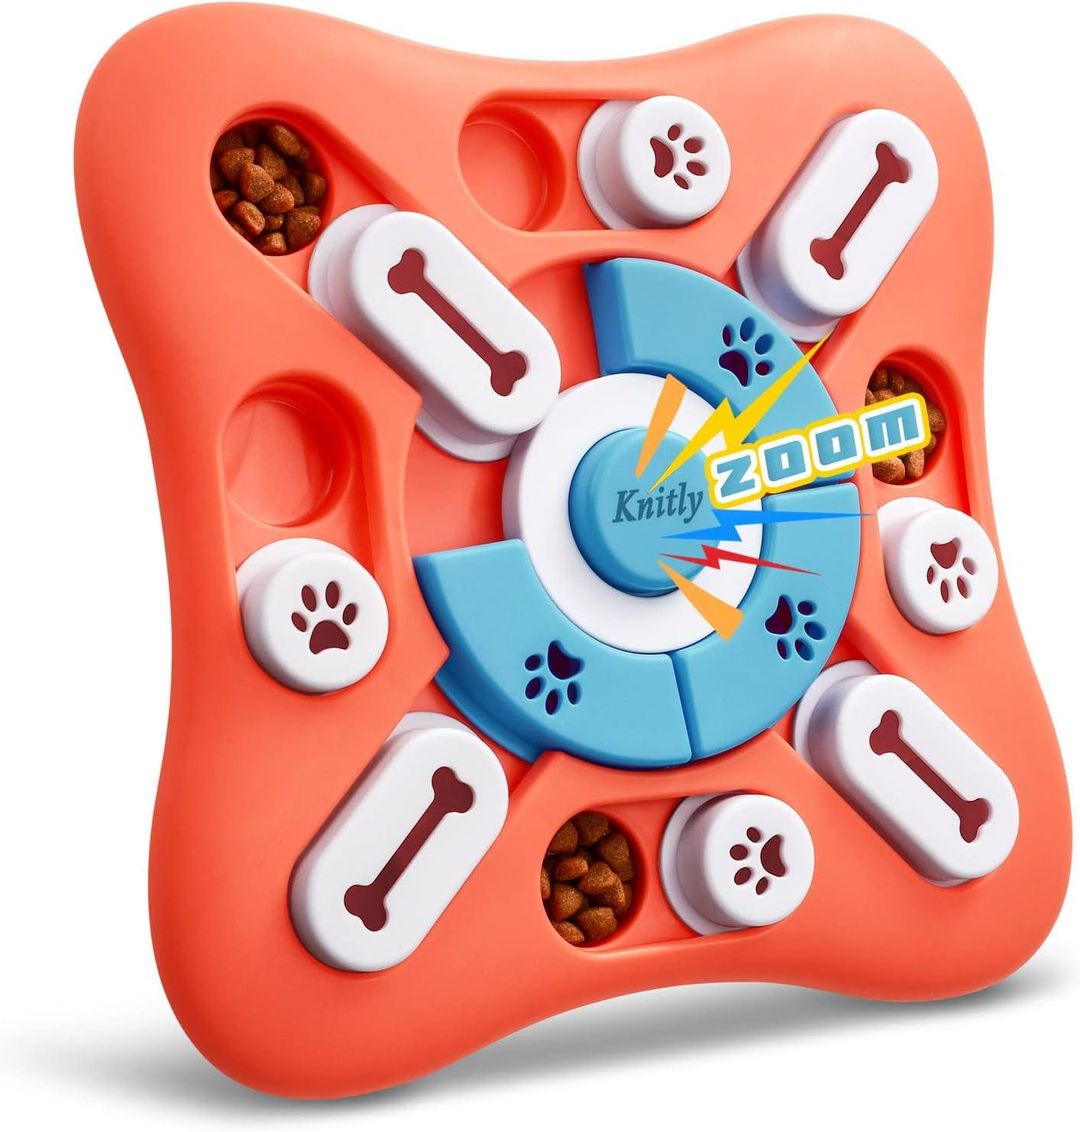 50% off of this Dog Treat Puzzle for Mental Exercise & Boredom Buster!